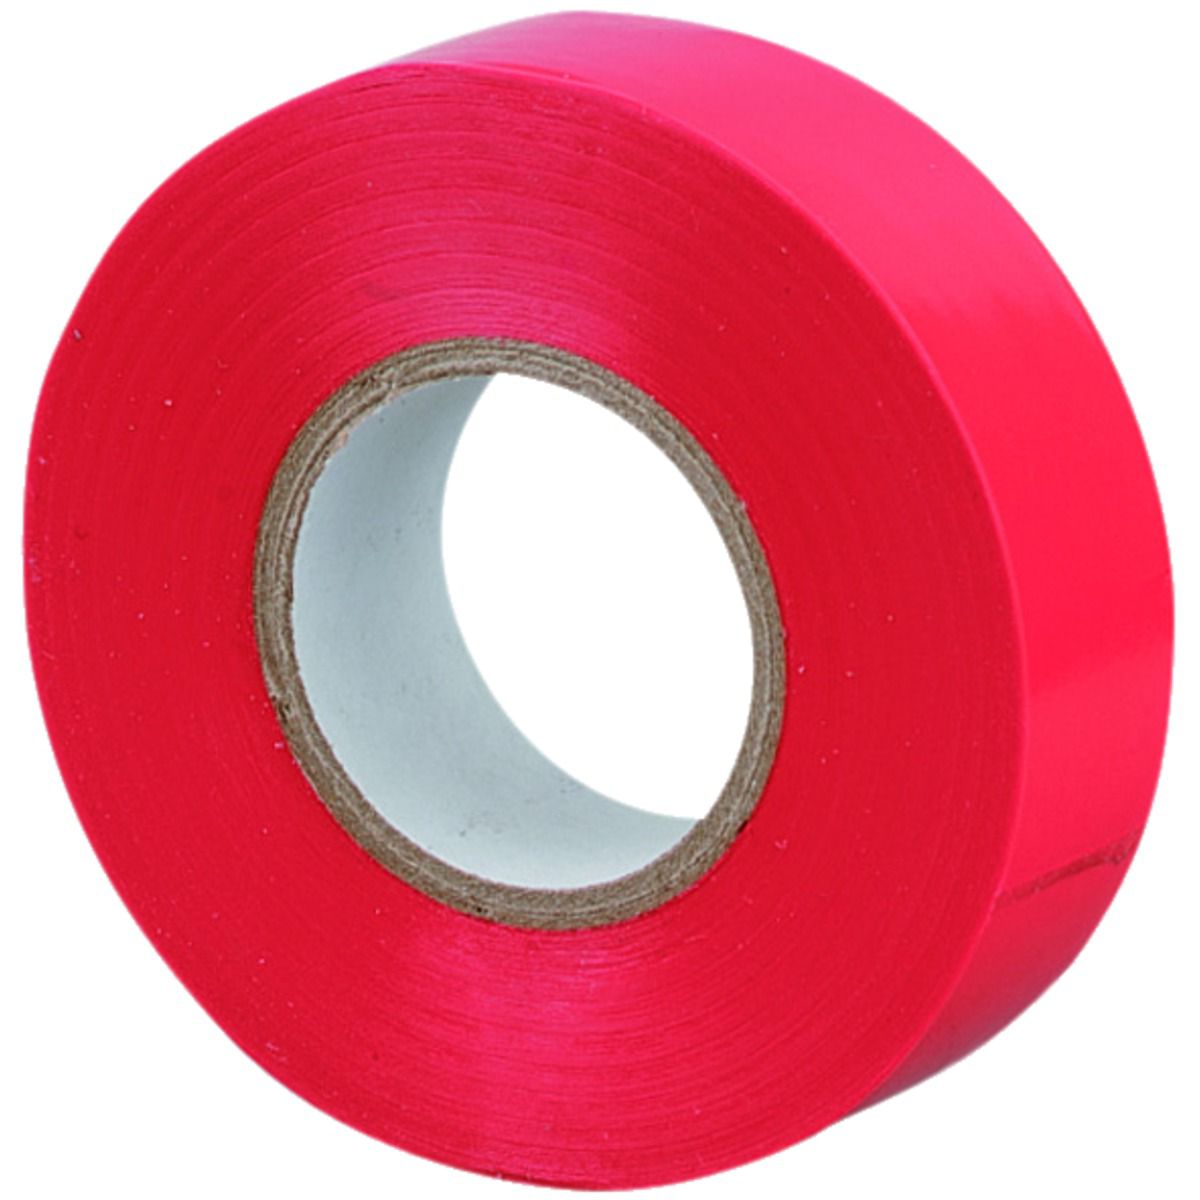 Image of Deta Red PVC Electrical Insulation Tape - 20m x 19mm - Pack of 10